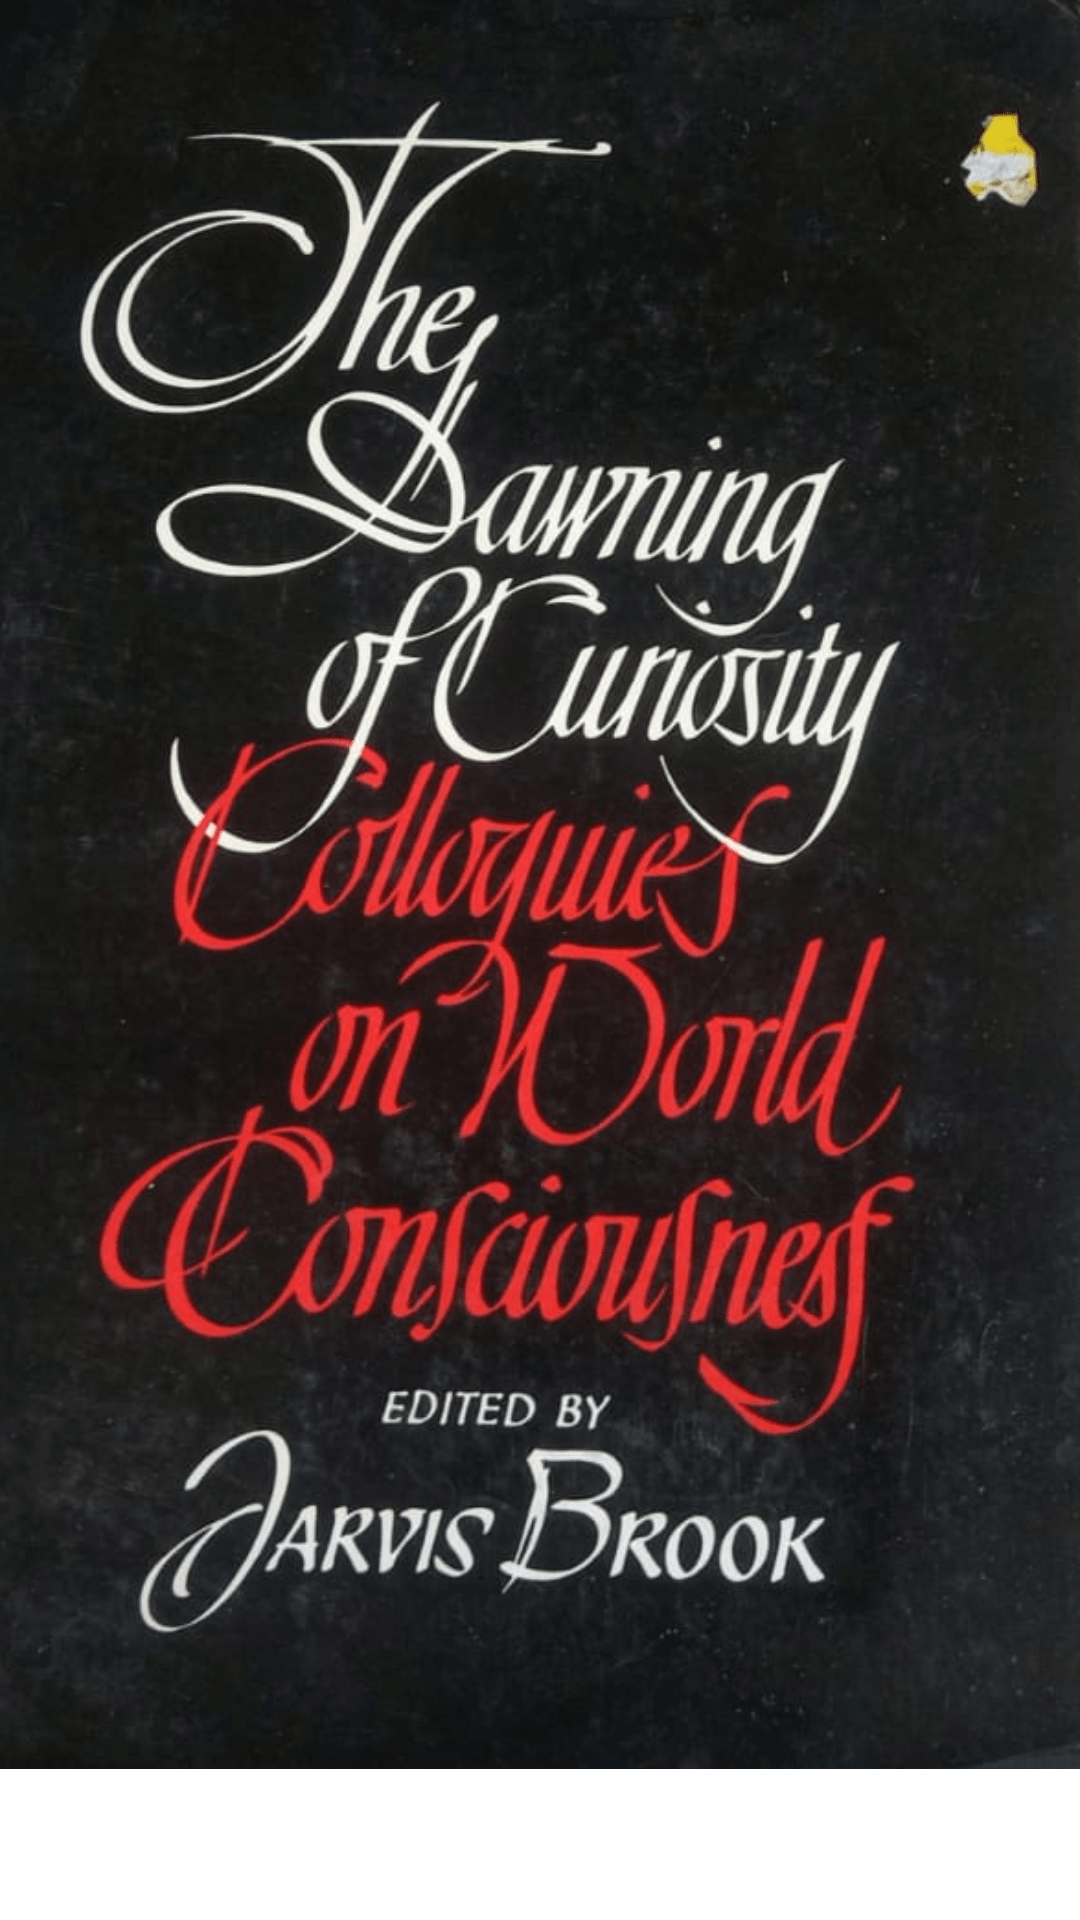 The Dawning of Curiosity: Colloquies on World Consciousness